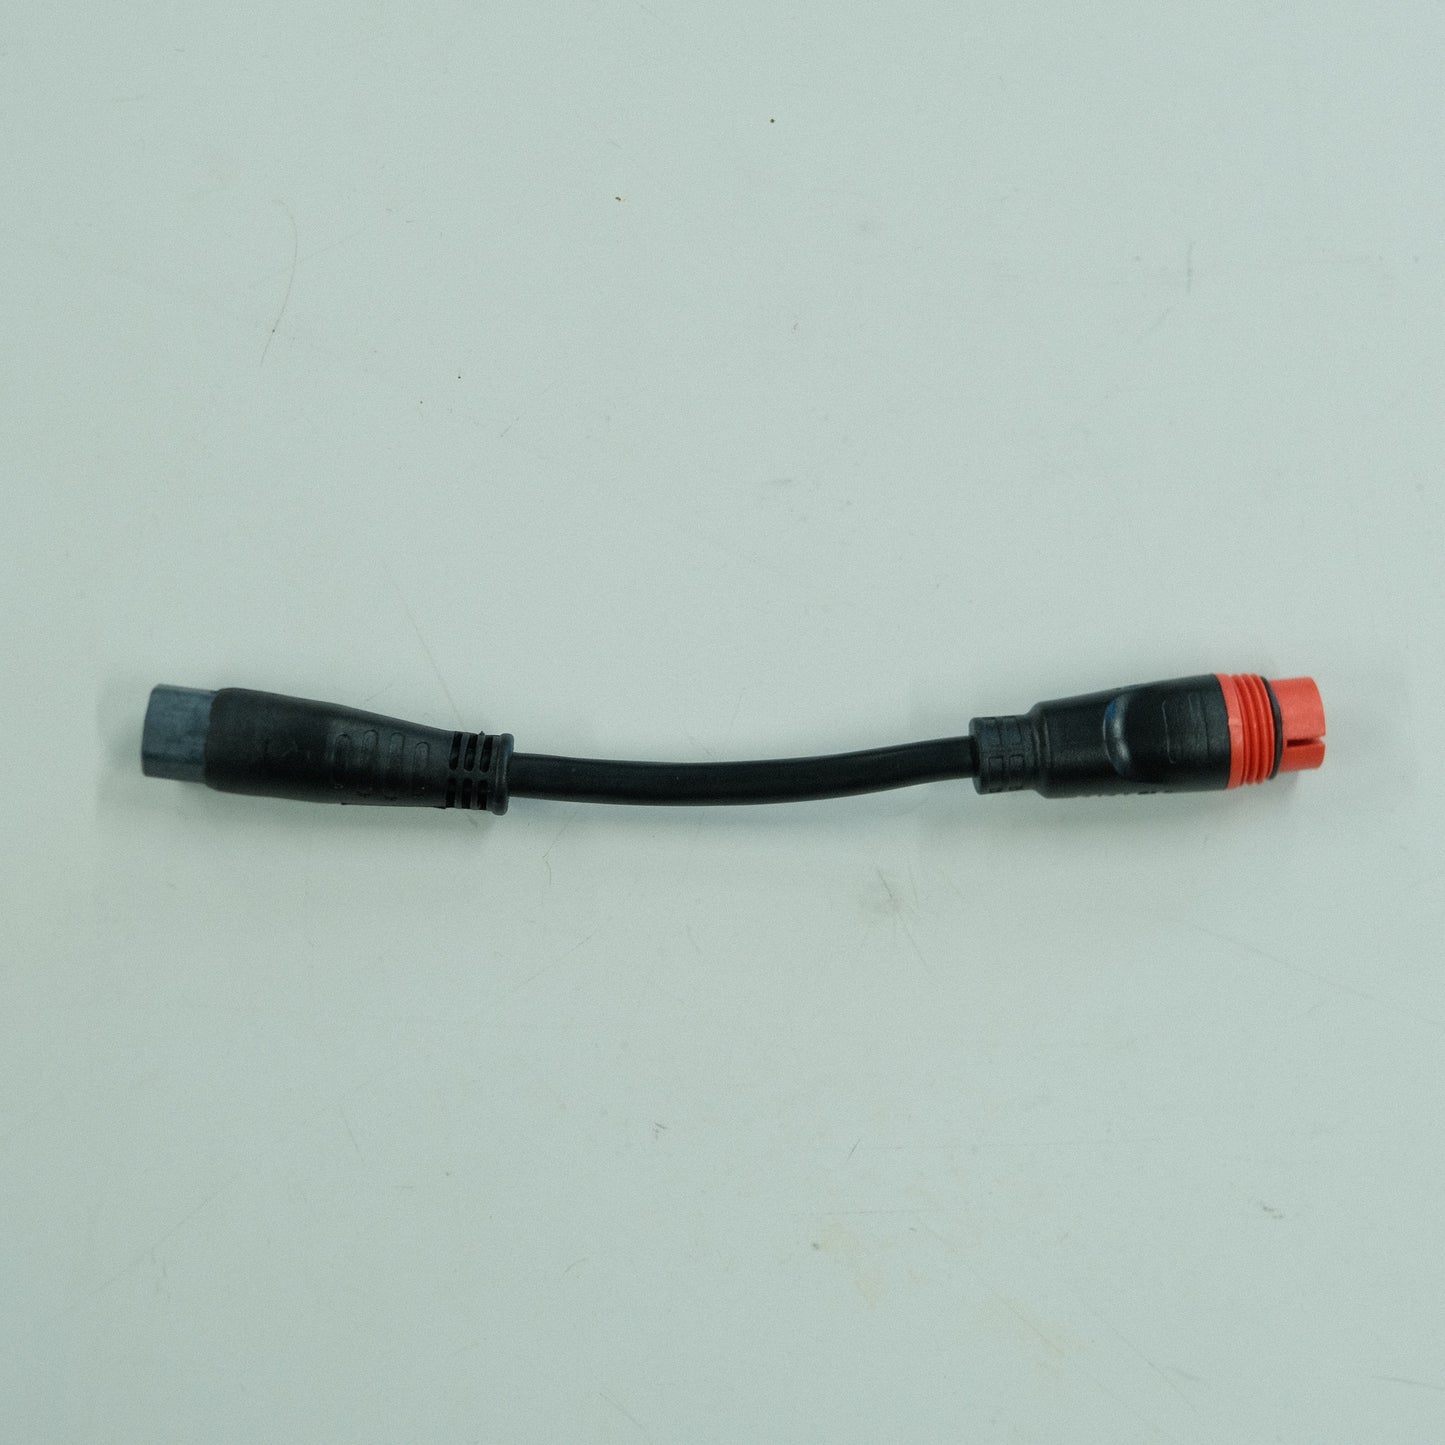 Adapter - Motor Cable - Julet L1121 Female to Z916 Male